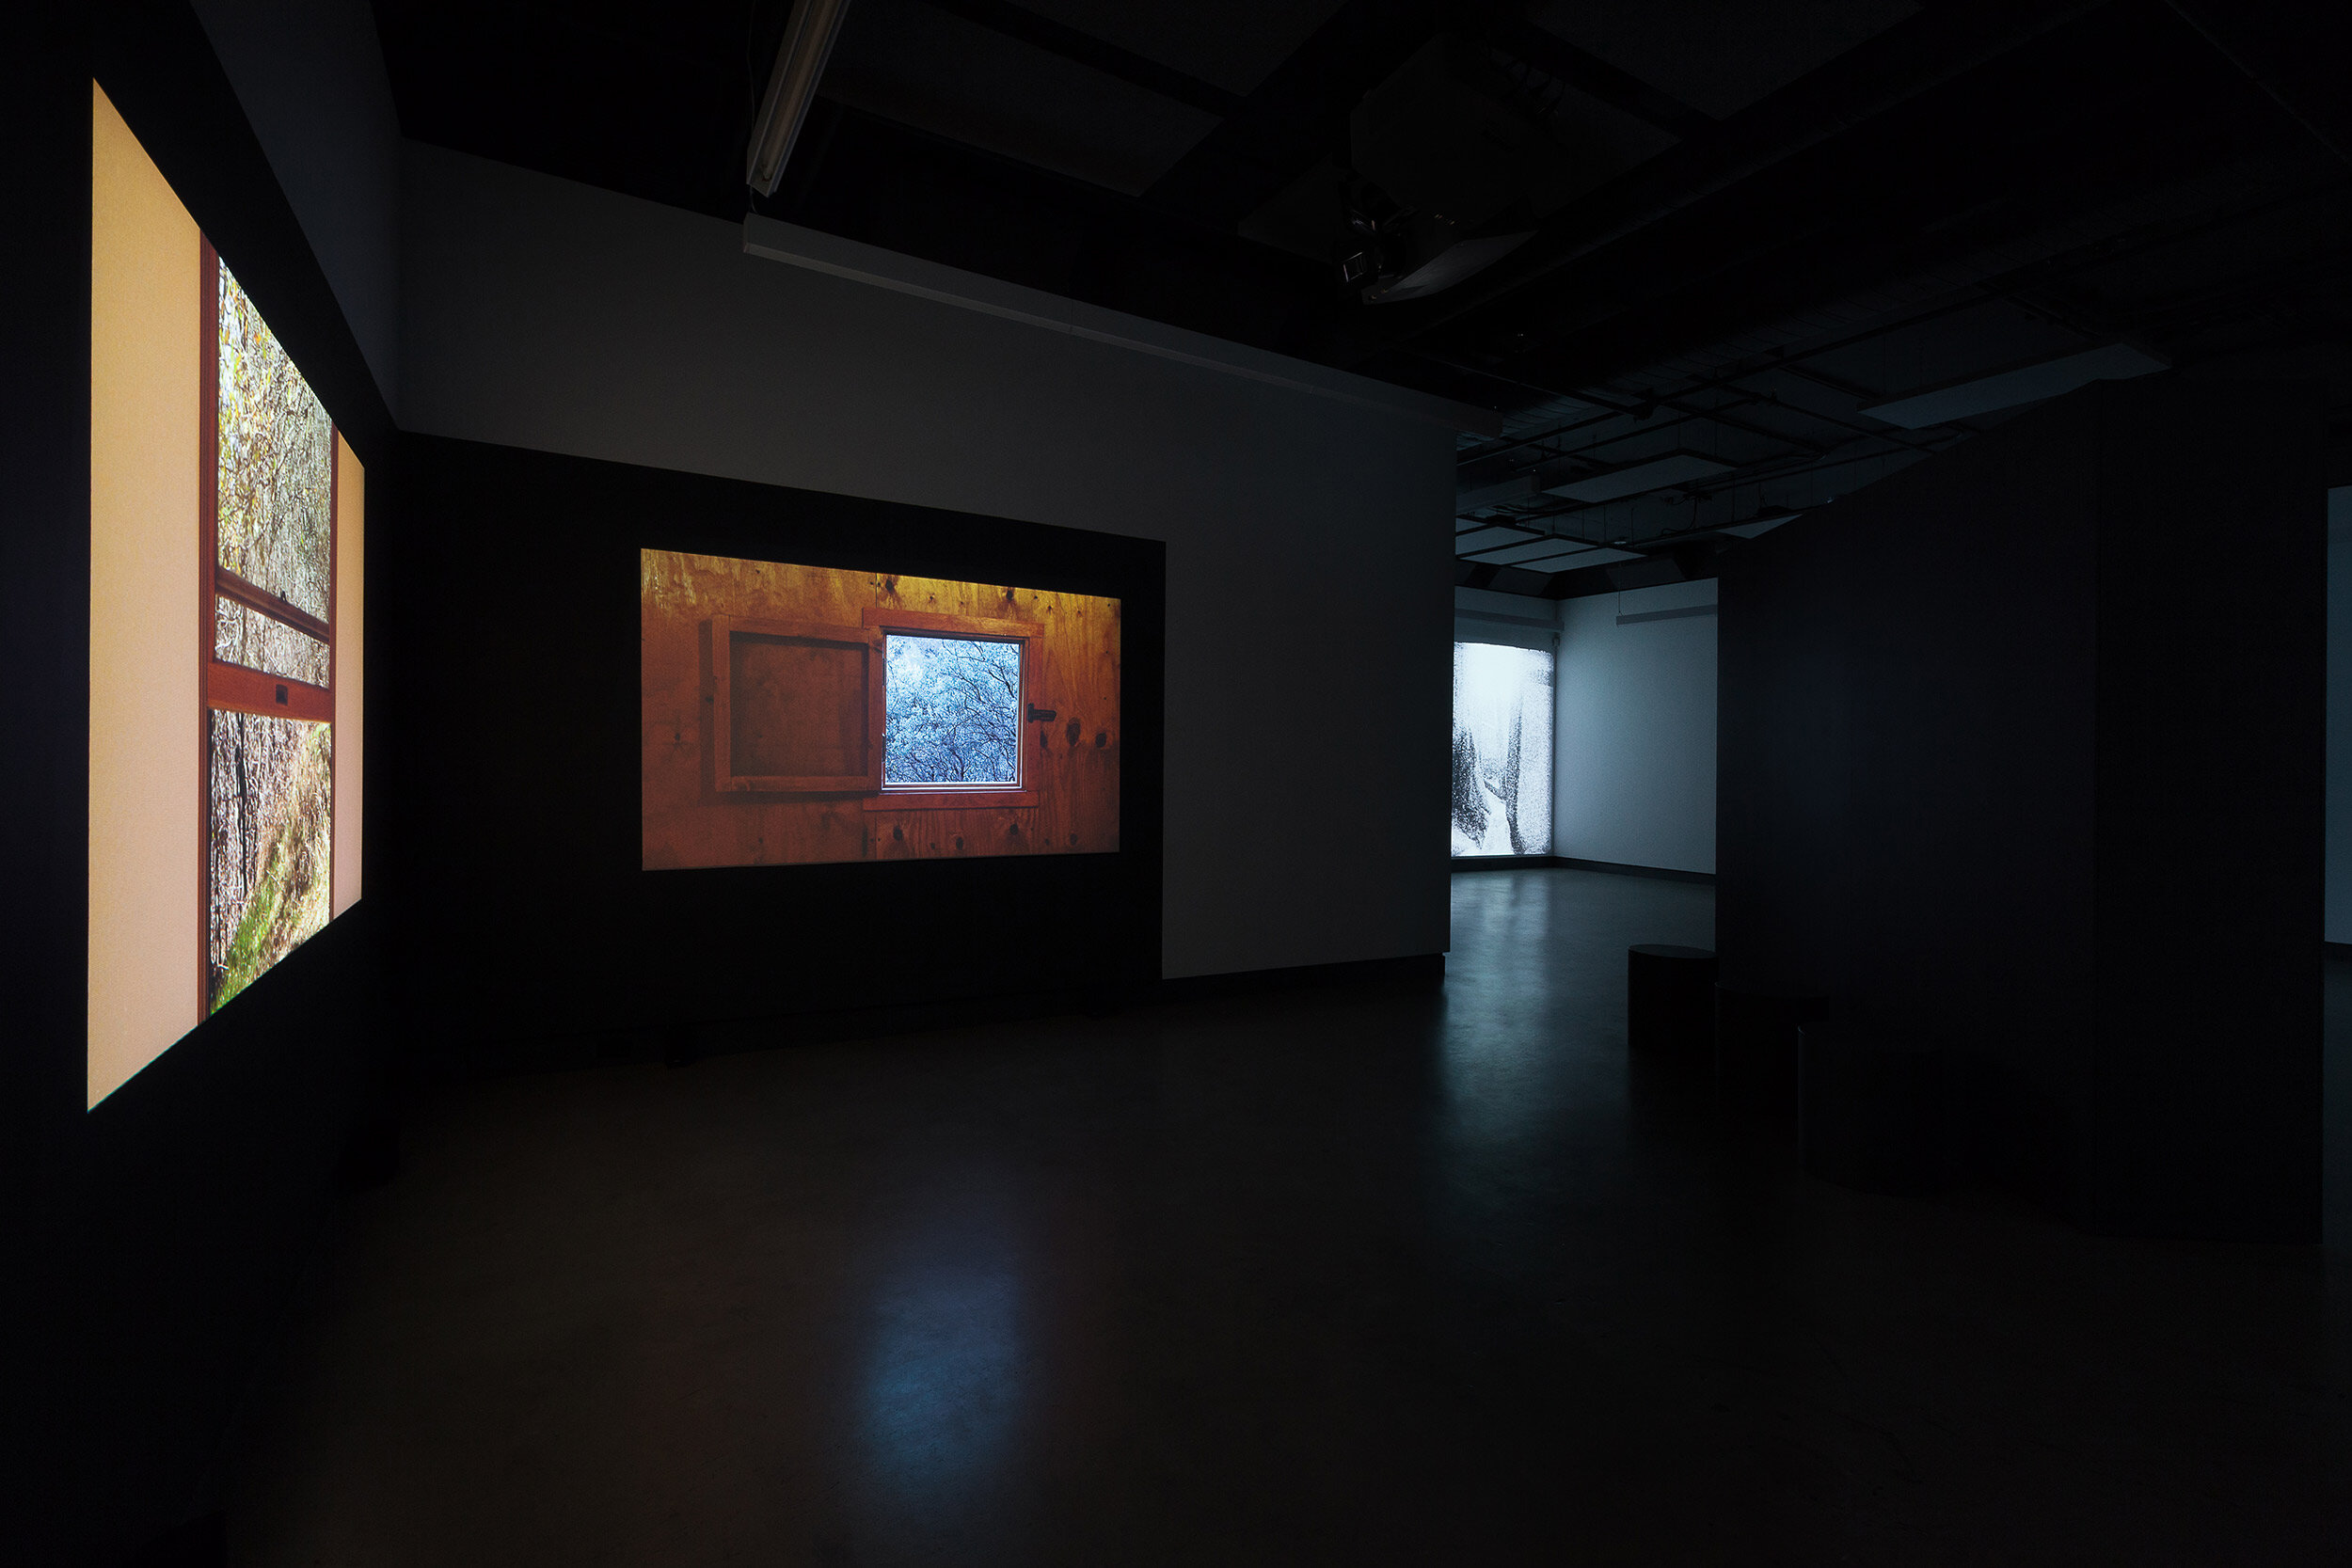  © James Benning,  Two Cabins  (2011). Installation view of the exhibition, Dazibao, 2018. From left to right: James Benning, Miriam Sampaio. Photo: Marilou Crispin. 